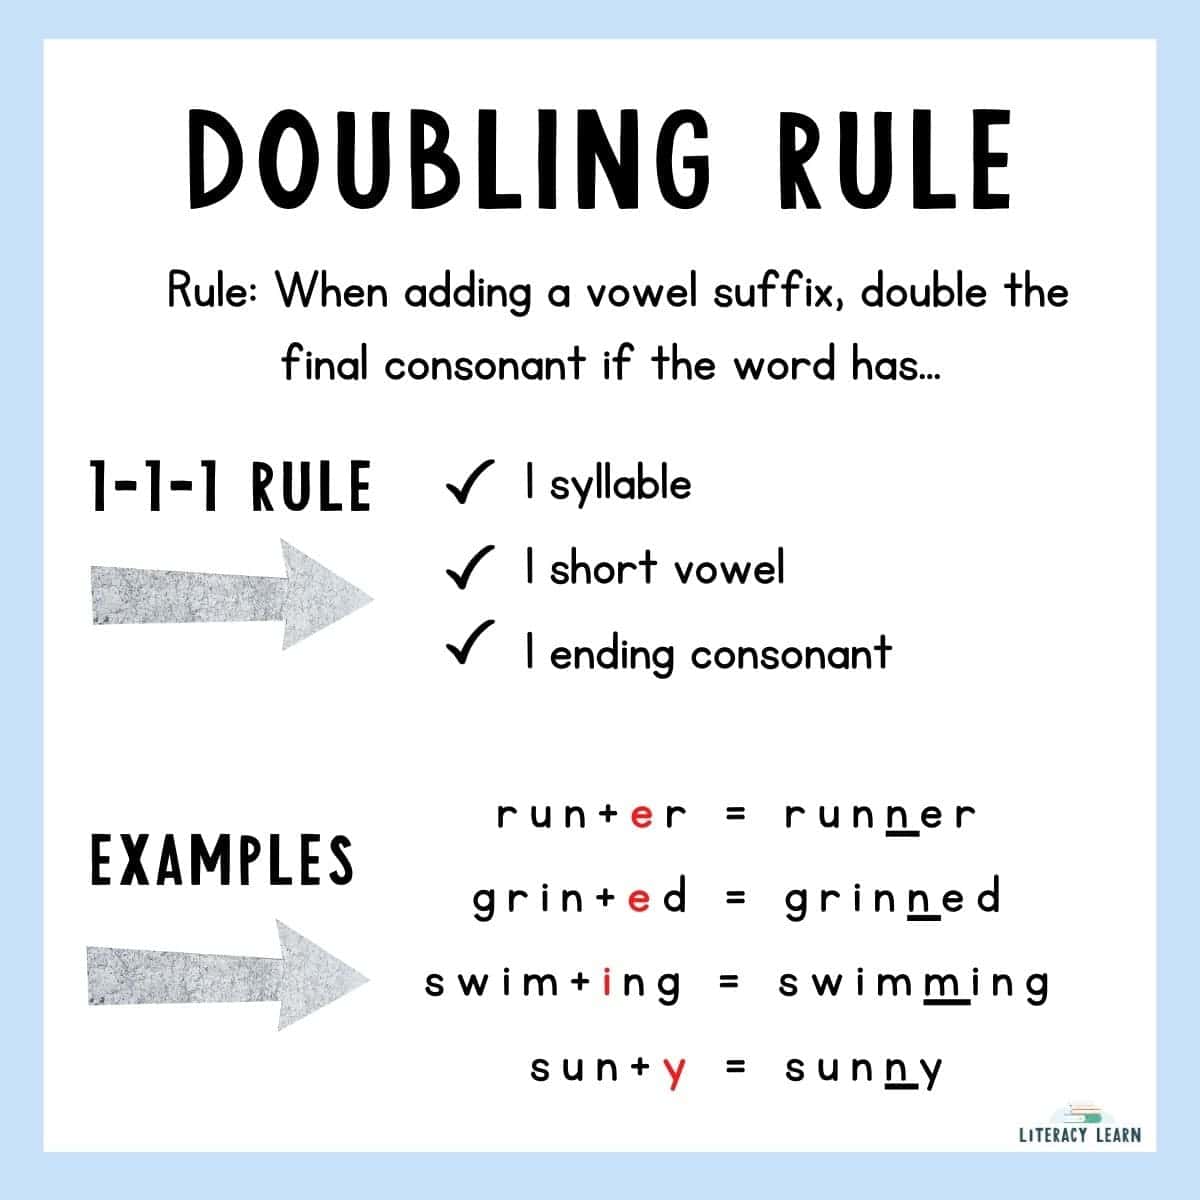 Blue graphic entitled "Doubling Rule" with the 1-1-1 rule and example words.